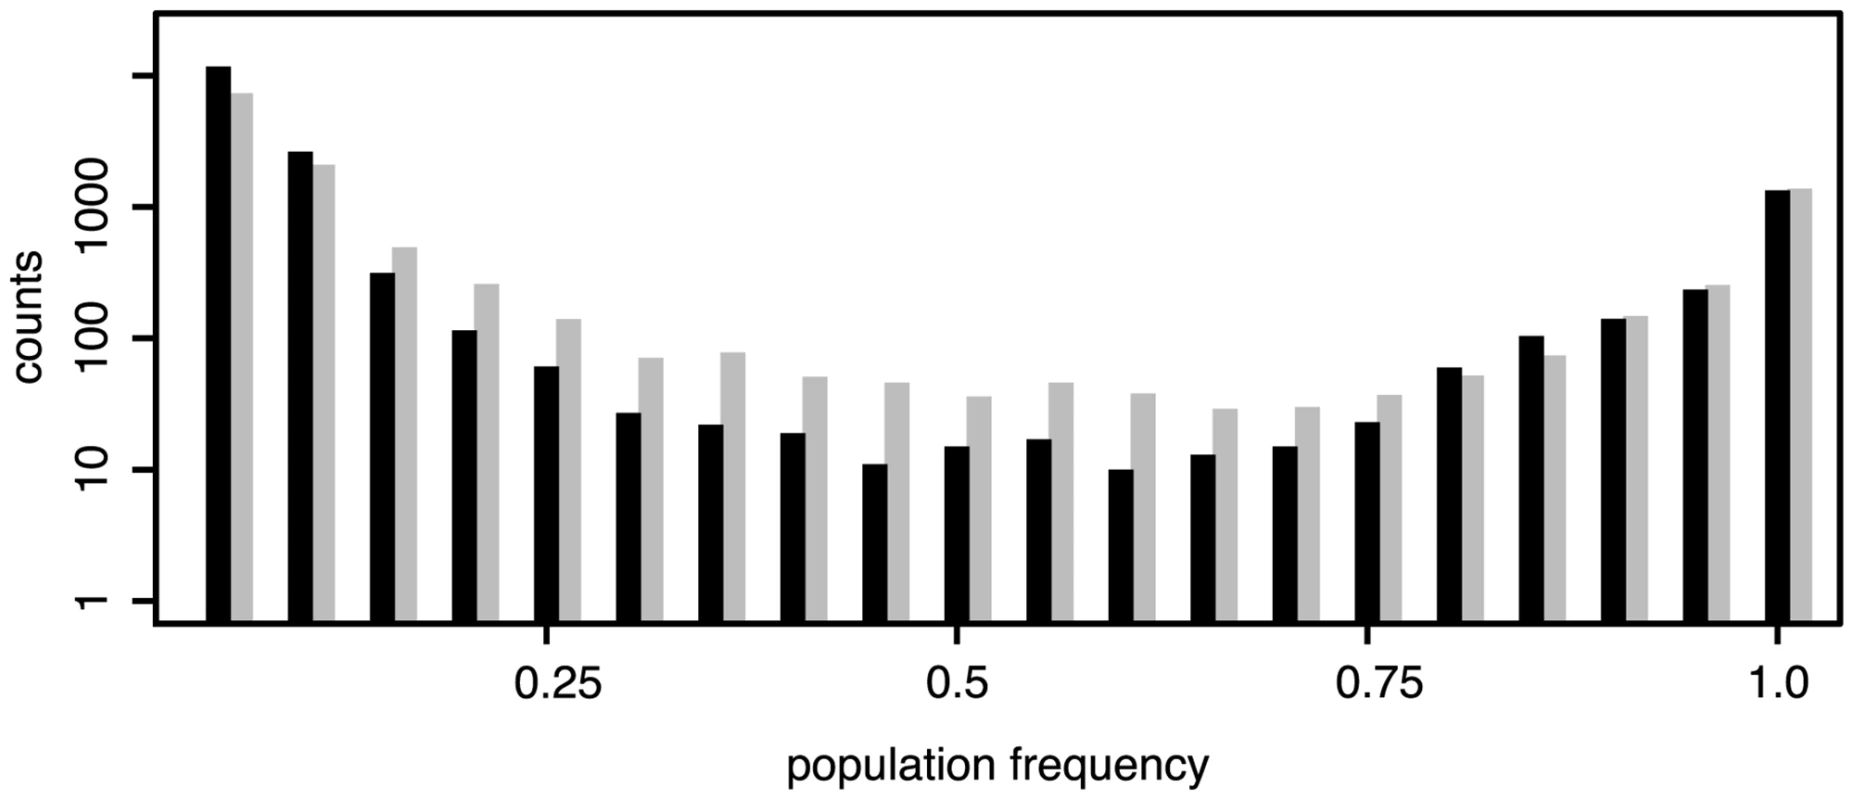 Frequency distributions of TE insertions in &lt;i&gt;D. melanogaster&lt;/i&gt; (black) and &lt;i&gt;D. simulans&lt;/i&gt; (grey); Only TE insertions for which the population frequencies could be estimated are shown (not overlapping, minimum physical coverage of 30); &lt;i&gt;D. melanogaster&lt;/i&gt;: 16,901 insertions; &lt;i&gt;D. simulans&lt;/i&gt;: 12,716 insertions.